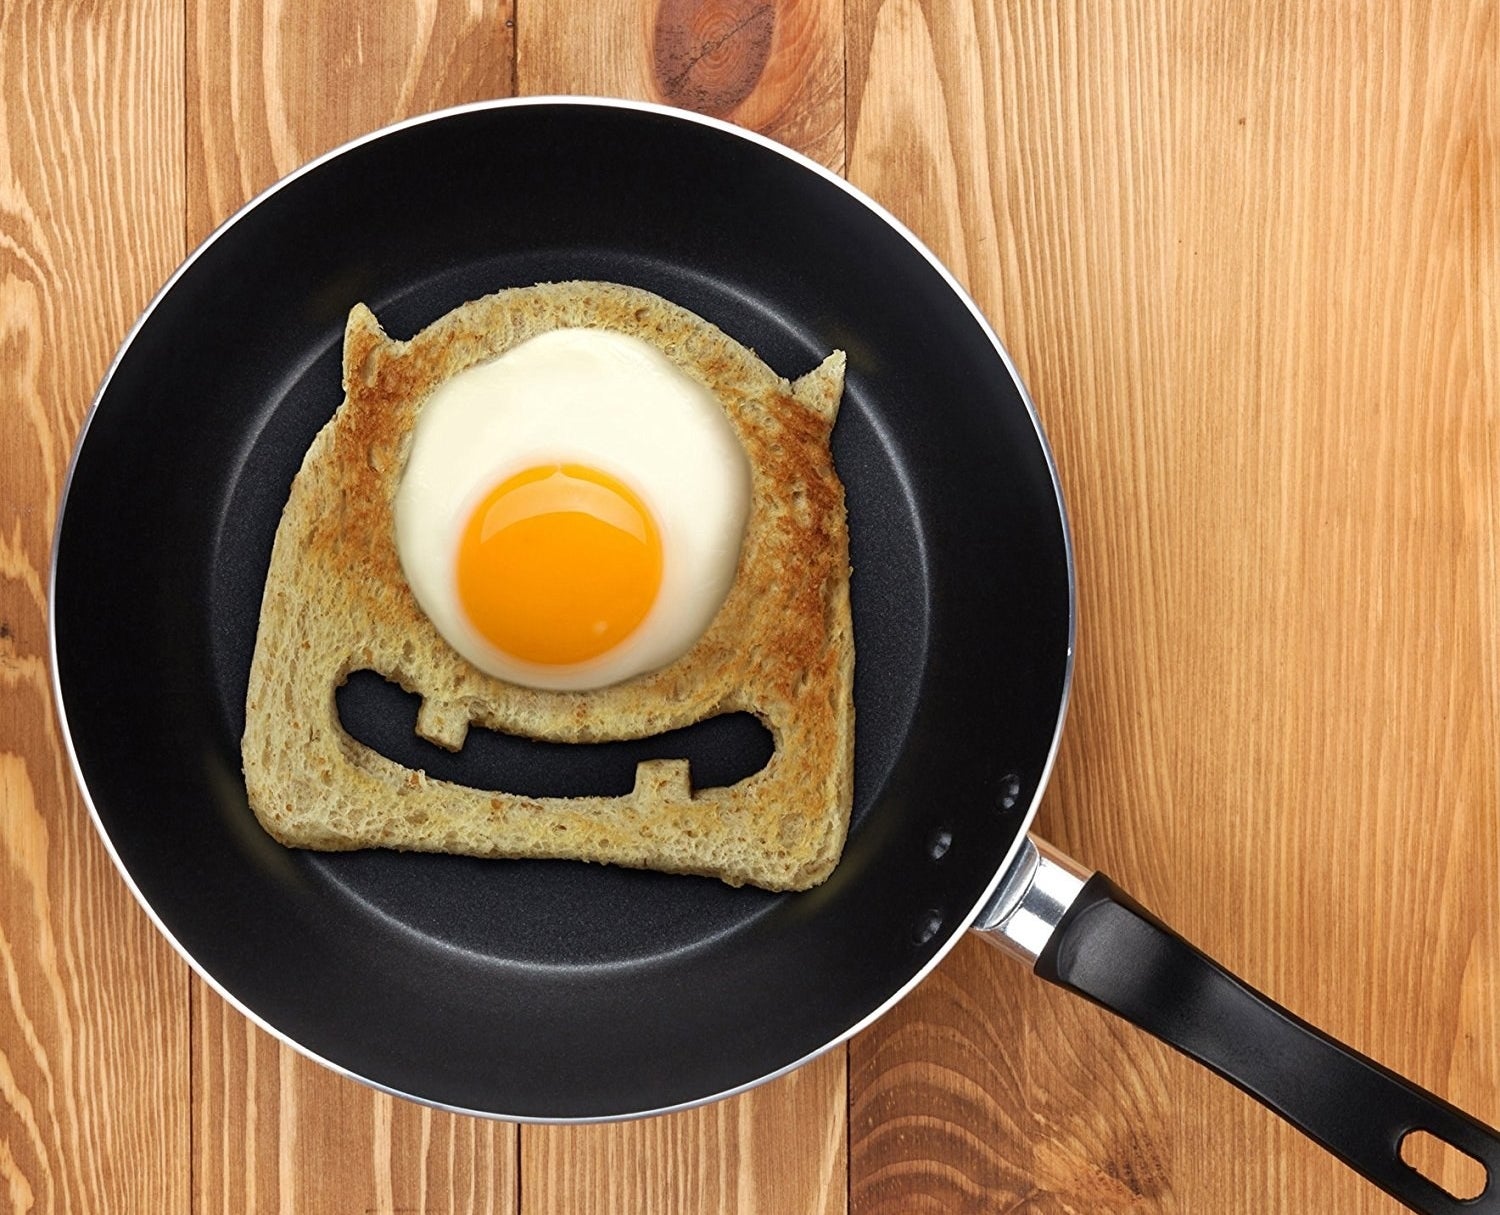 15 Egg Gadgets for People Who Love Eggs